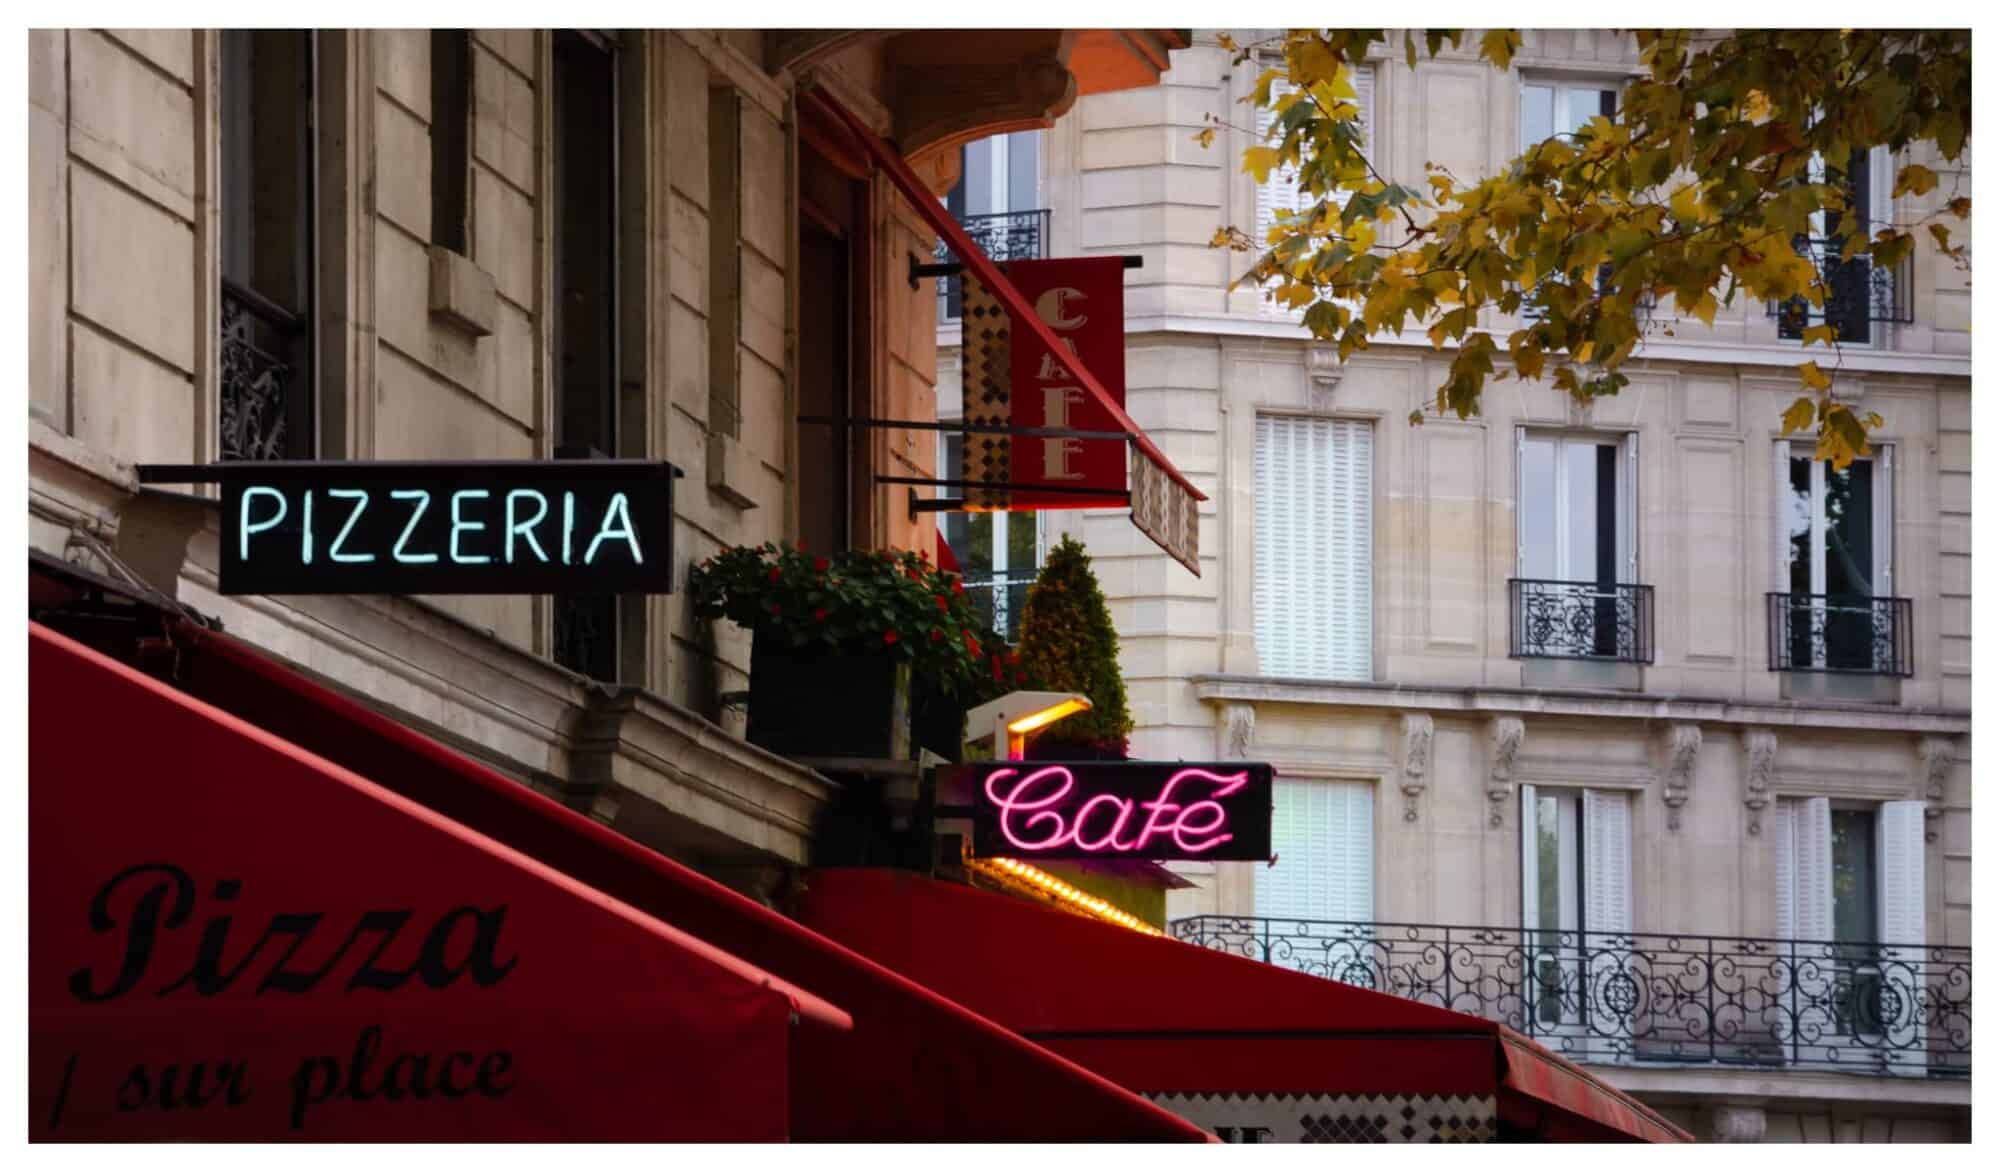 An Italian Pizzeria in Paris with some fall foliage in the frame